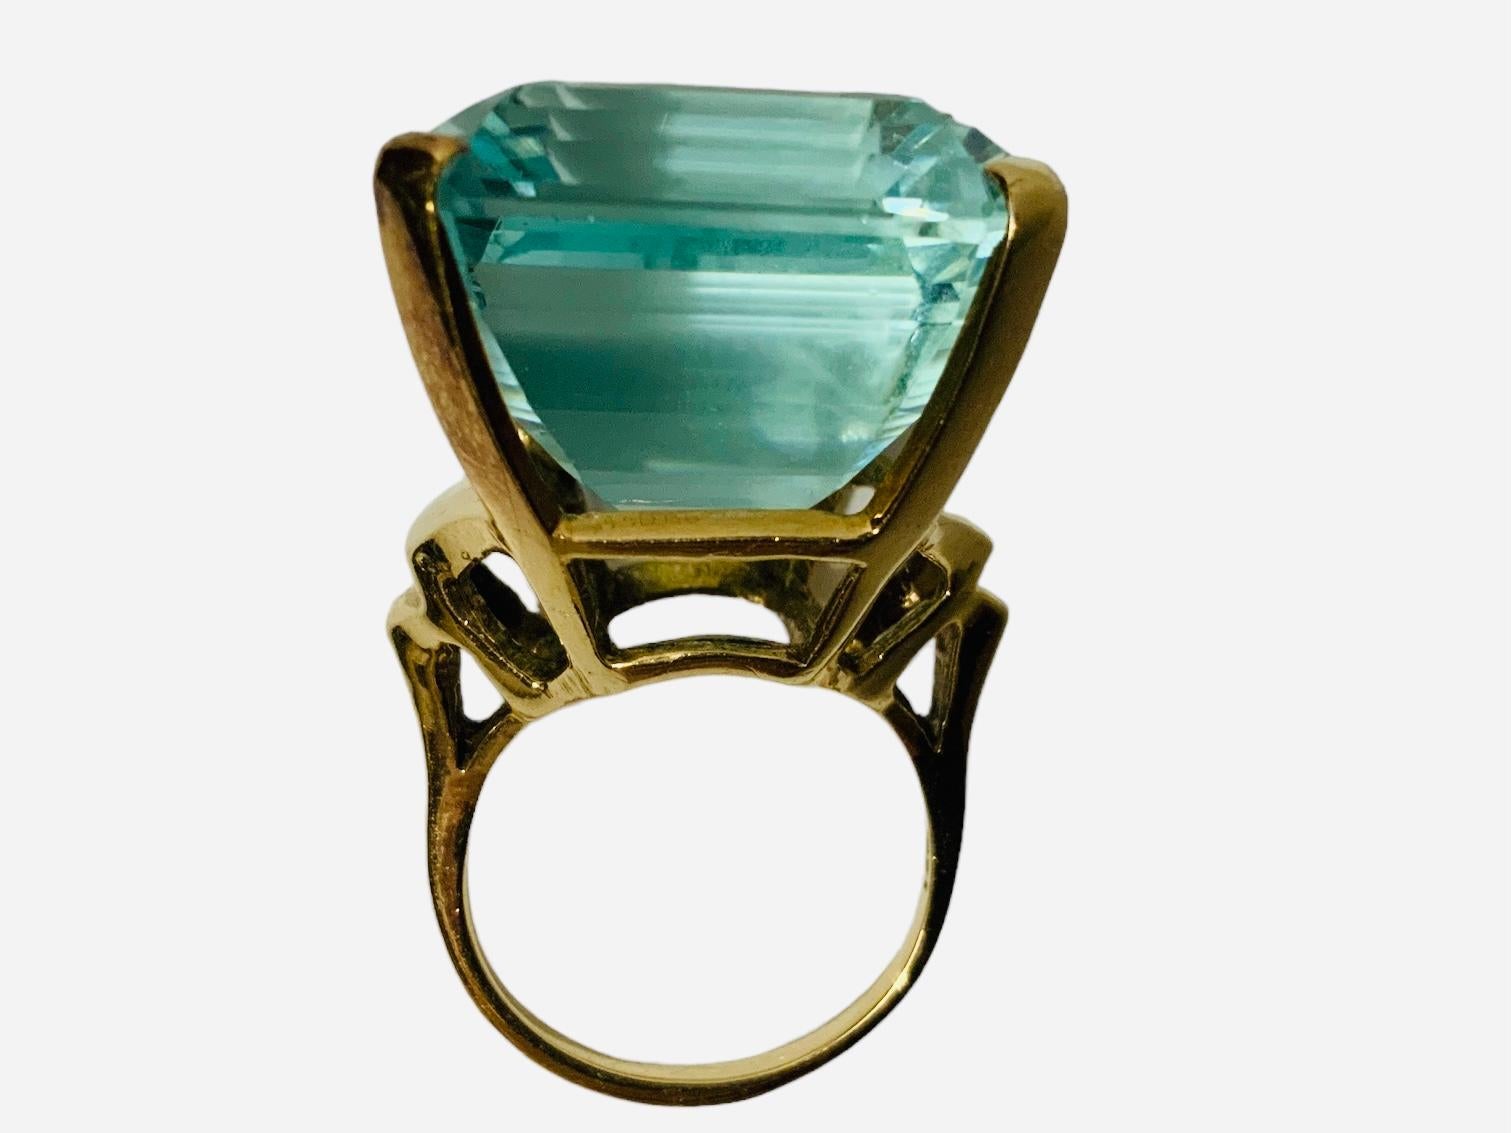 This is a 14K yellow gold Emerald Cut Aquamarine cocktail ring. The blue greenish Beryl Aquamarine is faceted and set in four gold prongs. Its measurements are 25.51 x 21.71 x 16.26 mm and It weighs 61.23 carats. The side walls between the prongs